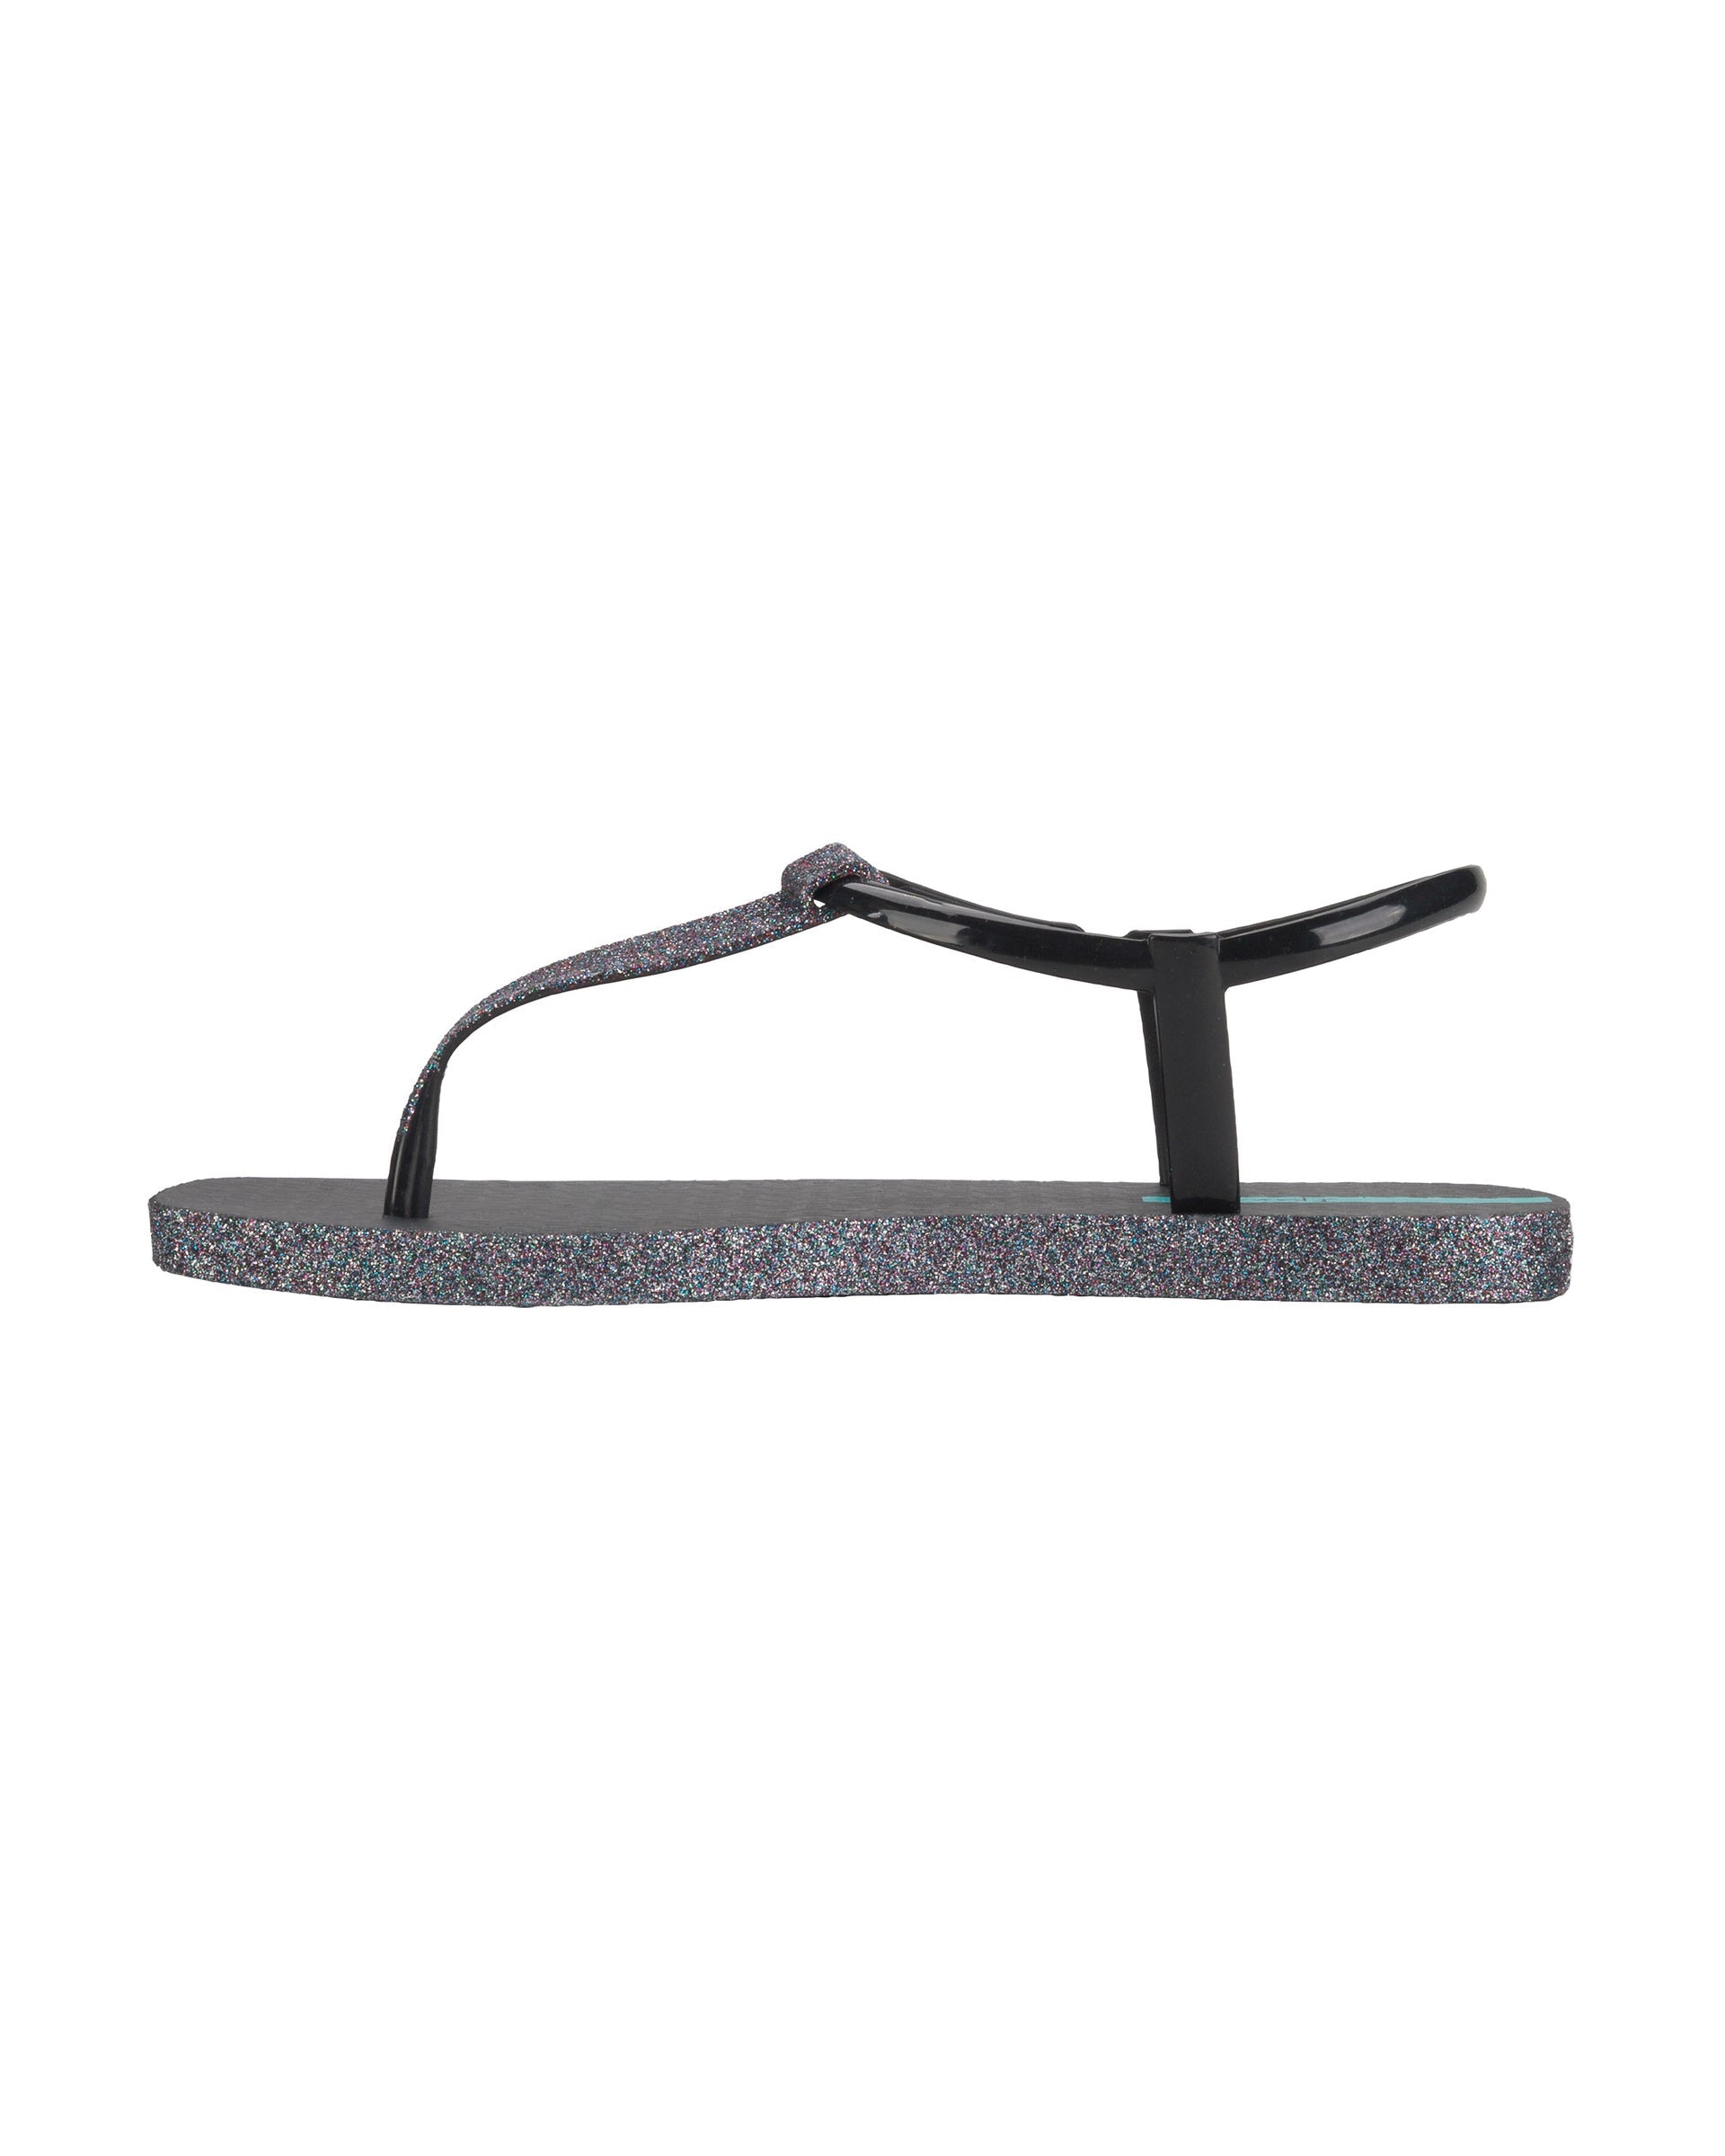 Inner side view of a black Ipanema Class Edge Glow t-strap women's sandal with glitter black thong.